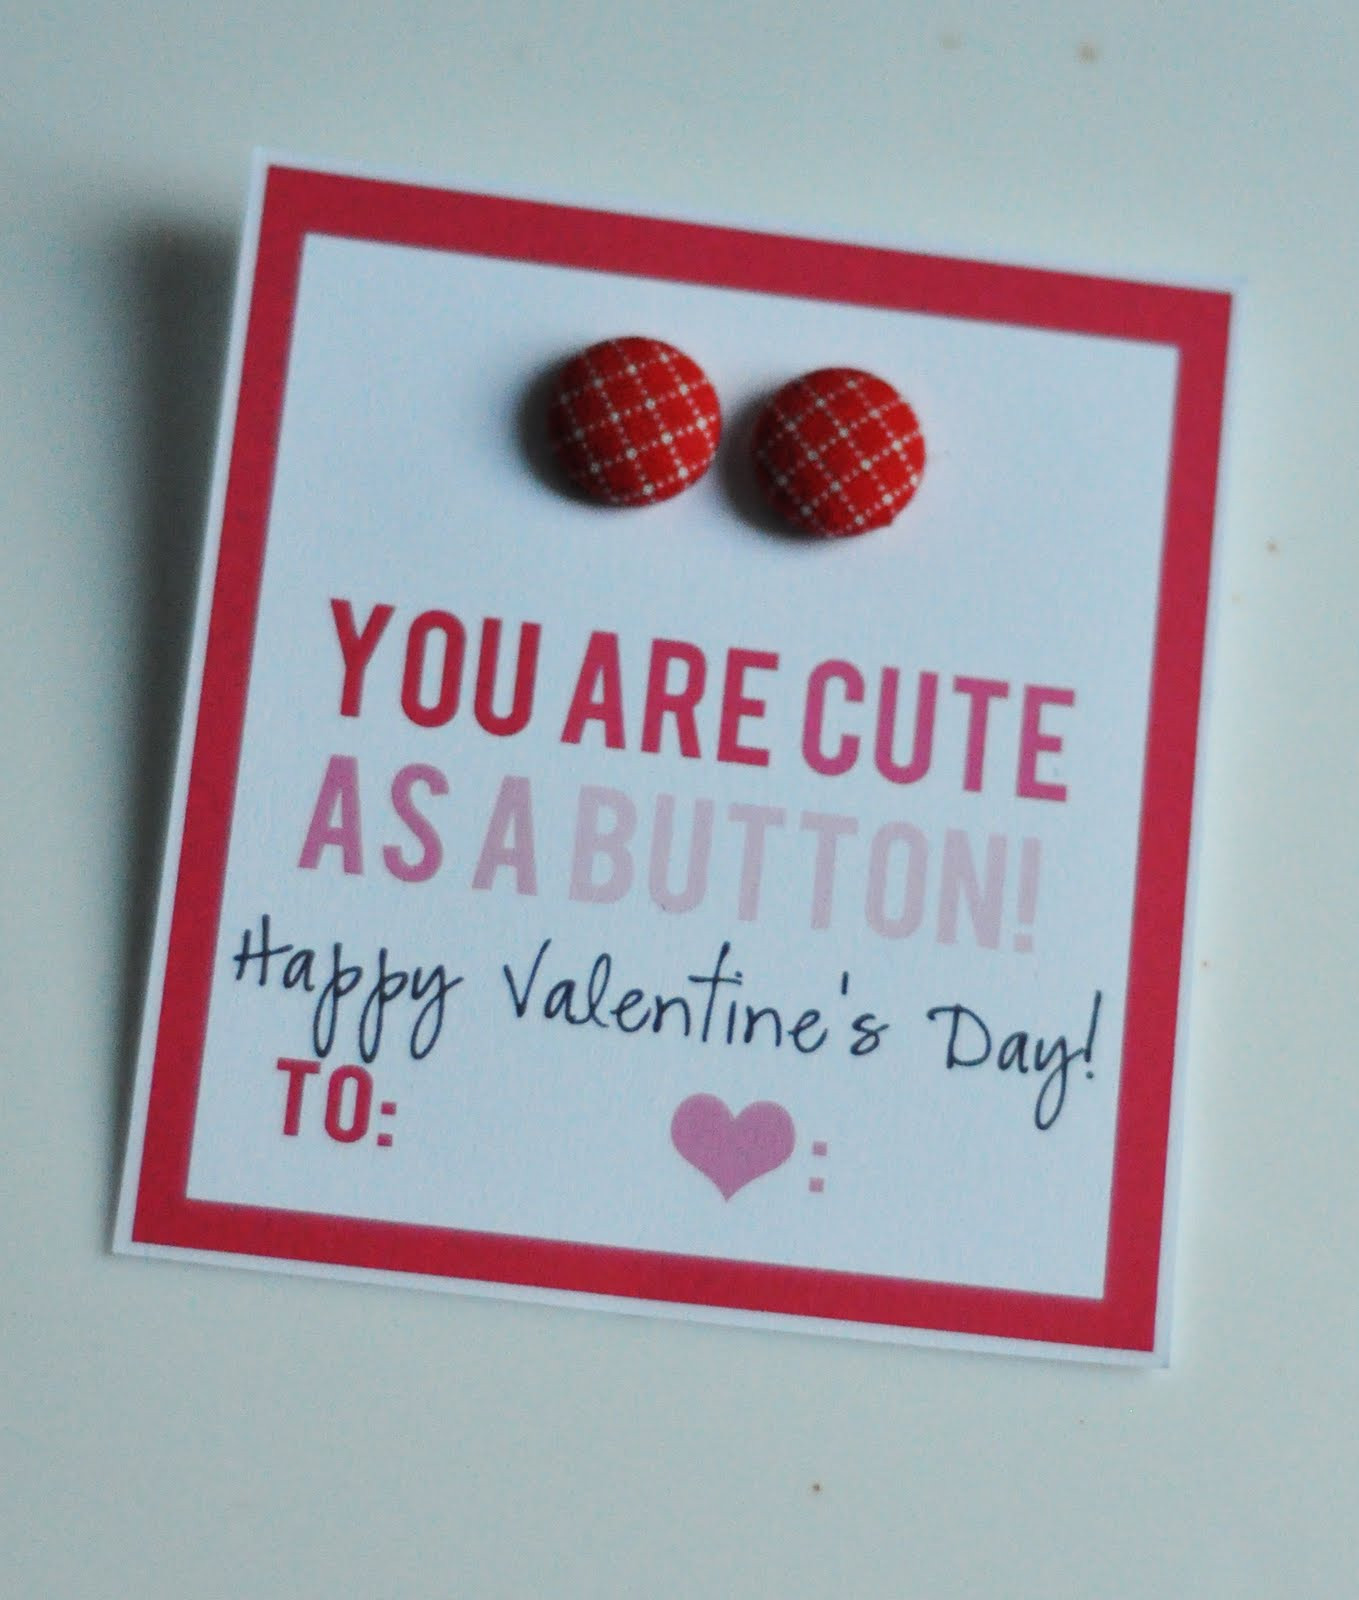 Cute Valentines Day Date Ideas
 Valentines Day Gift Ideas